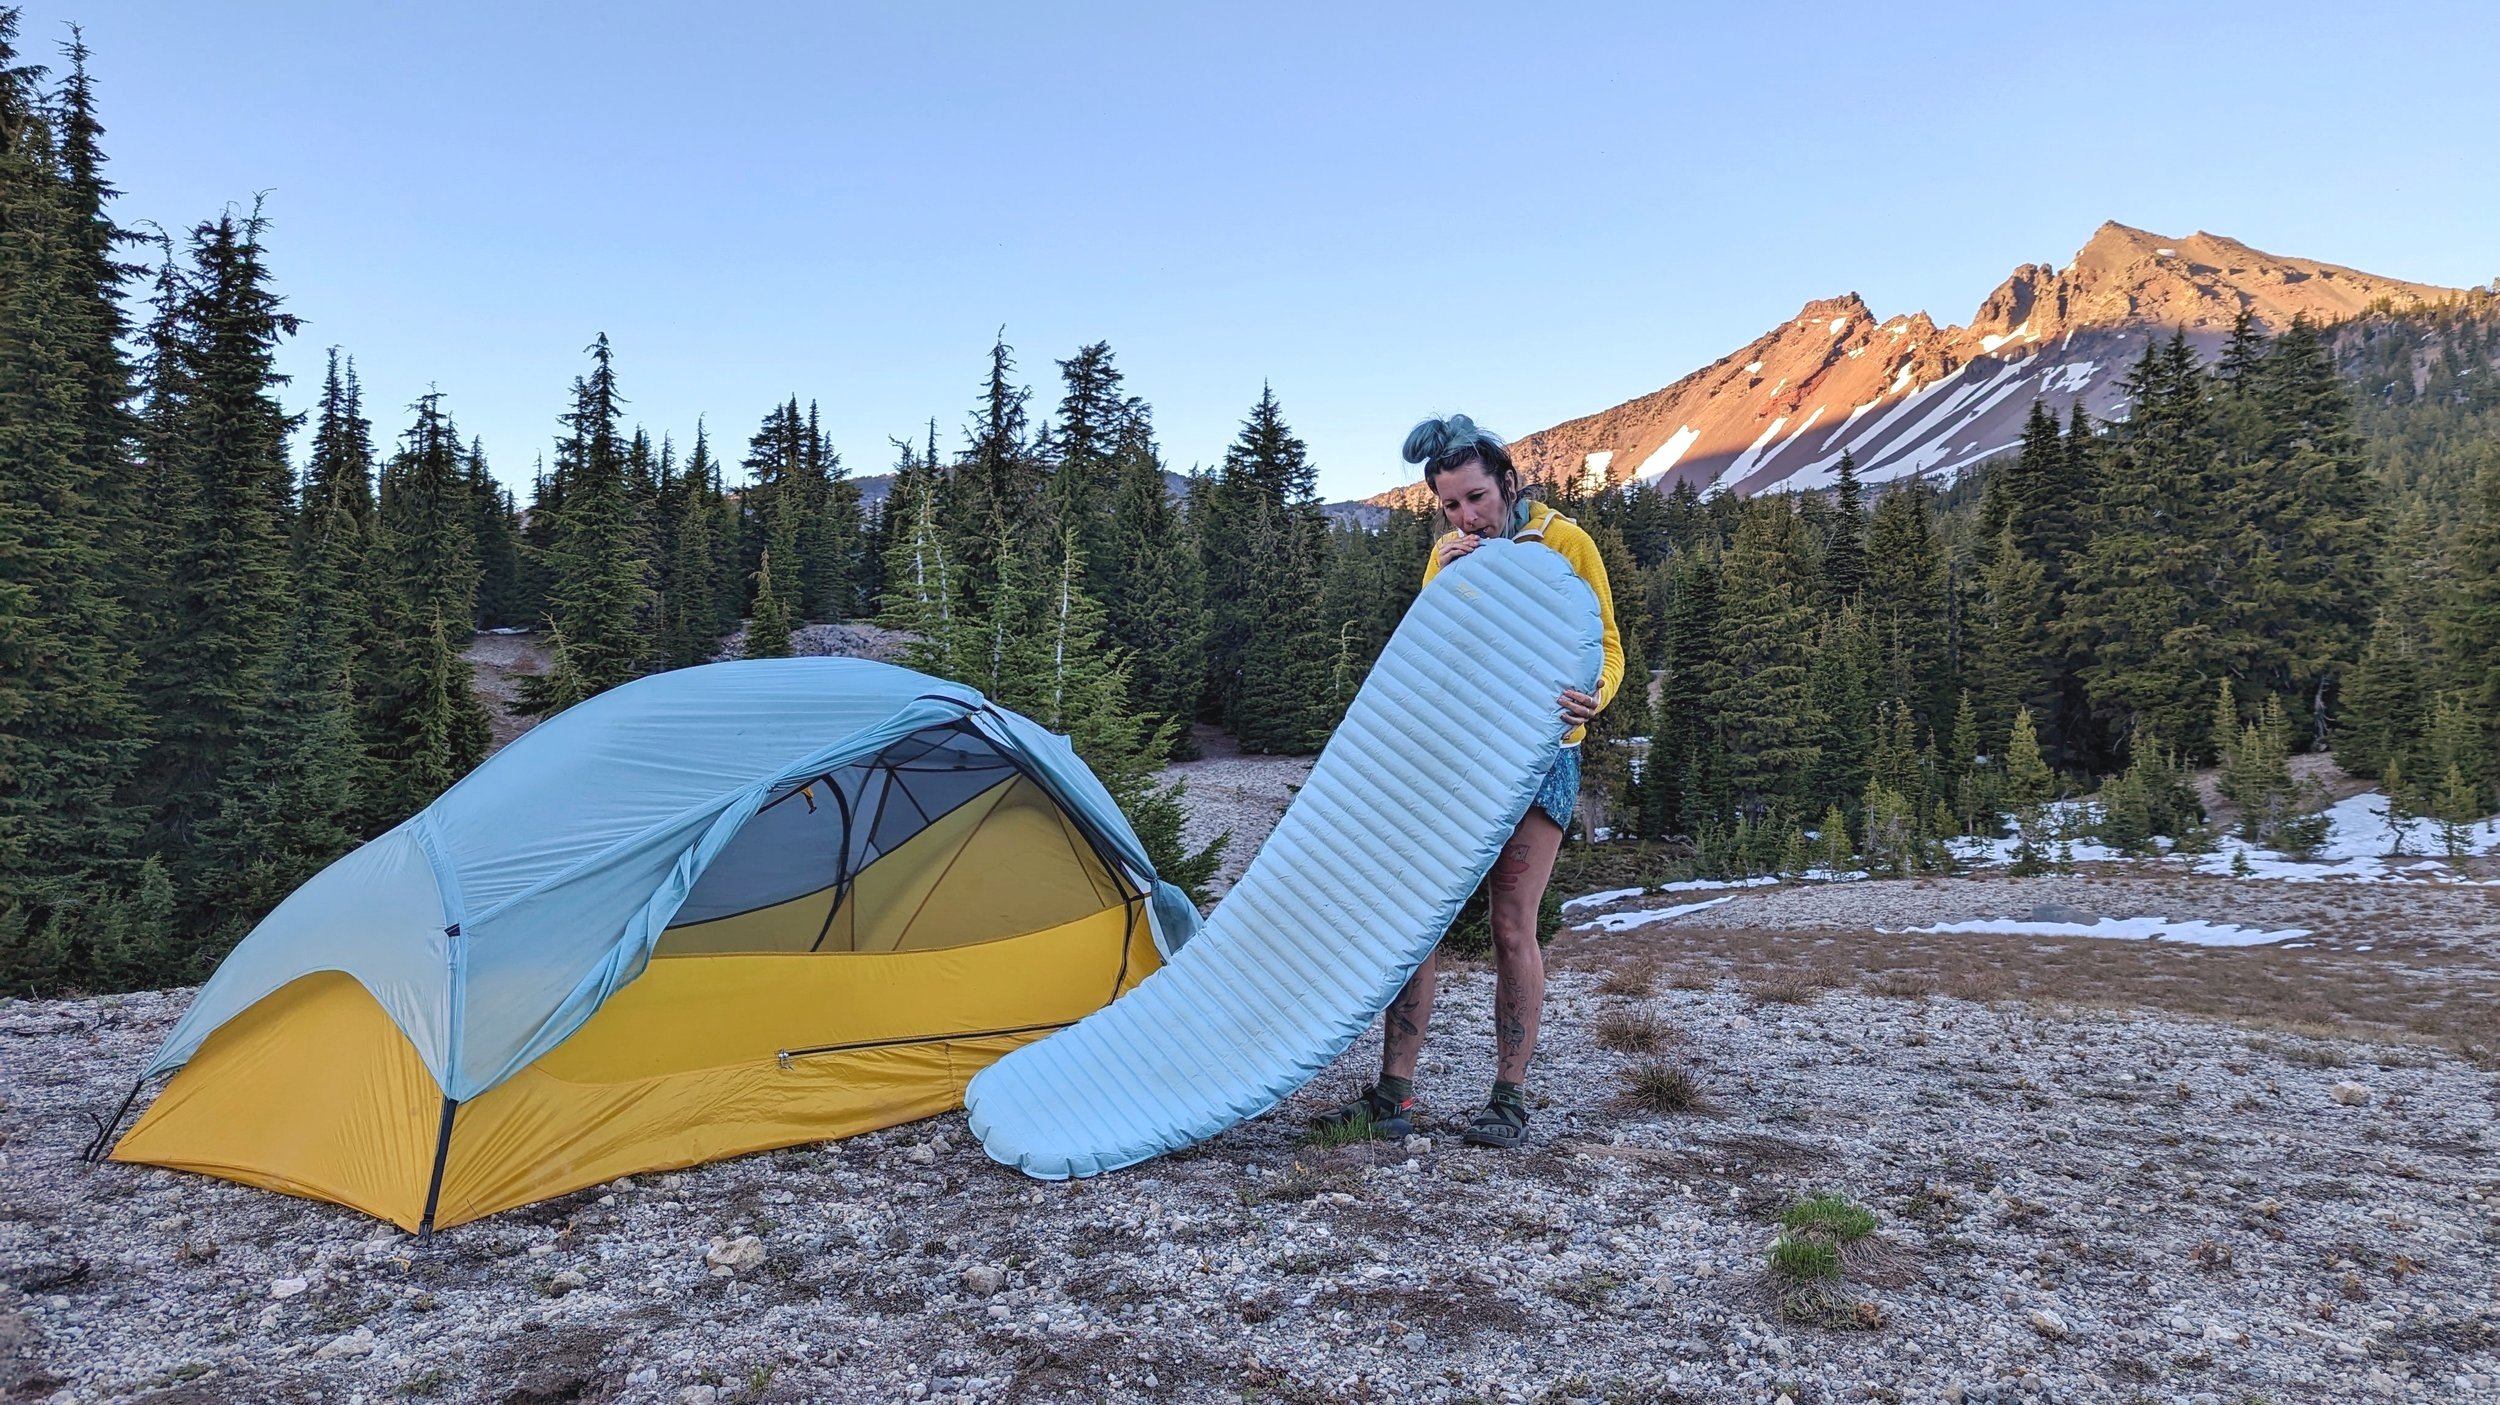 A hiker blowing up the Therm-a-Rest NeoAir Xtherm NXT by mouth next to their tent with a mountain in the background